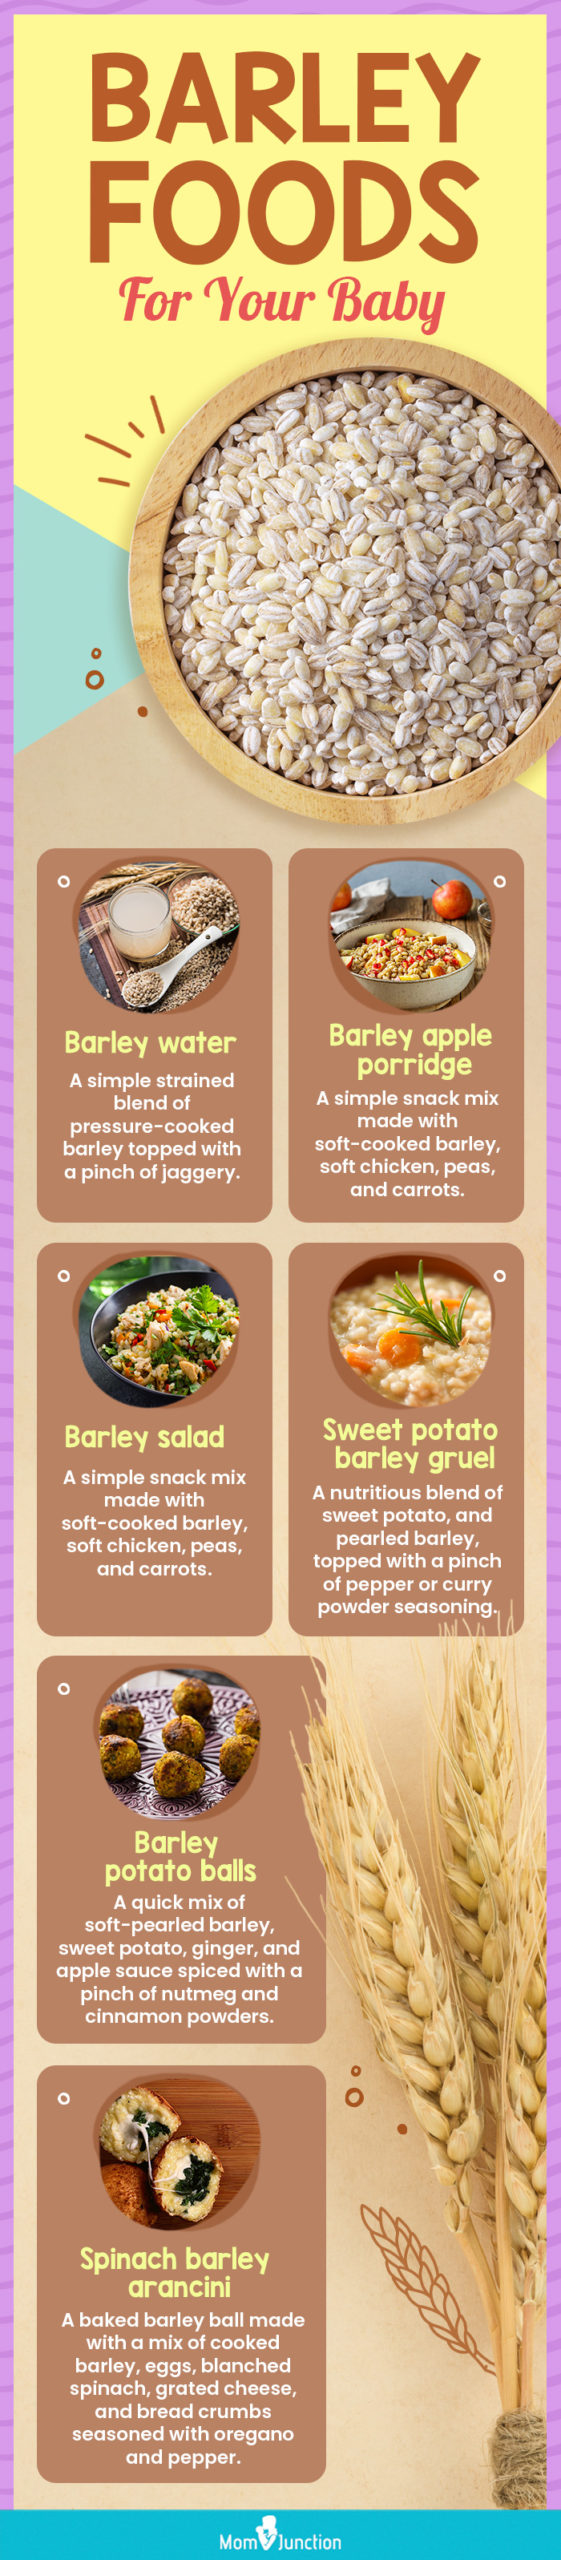 barley foods for your baby (infographic) 